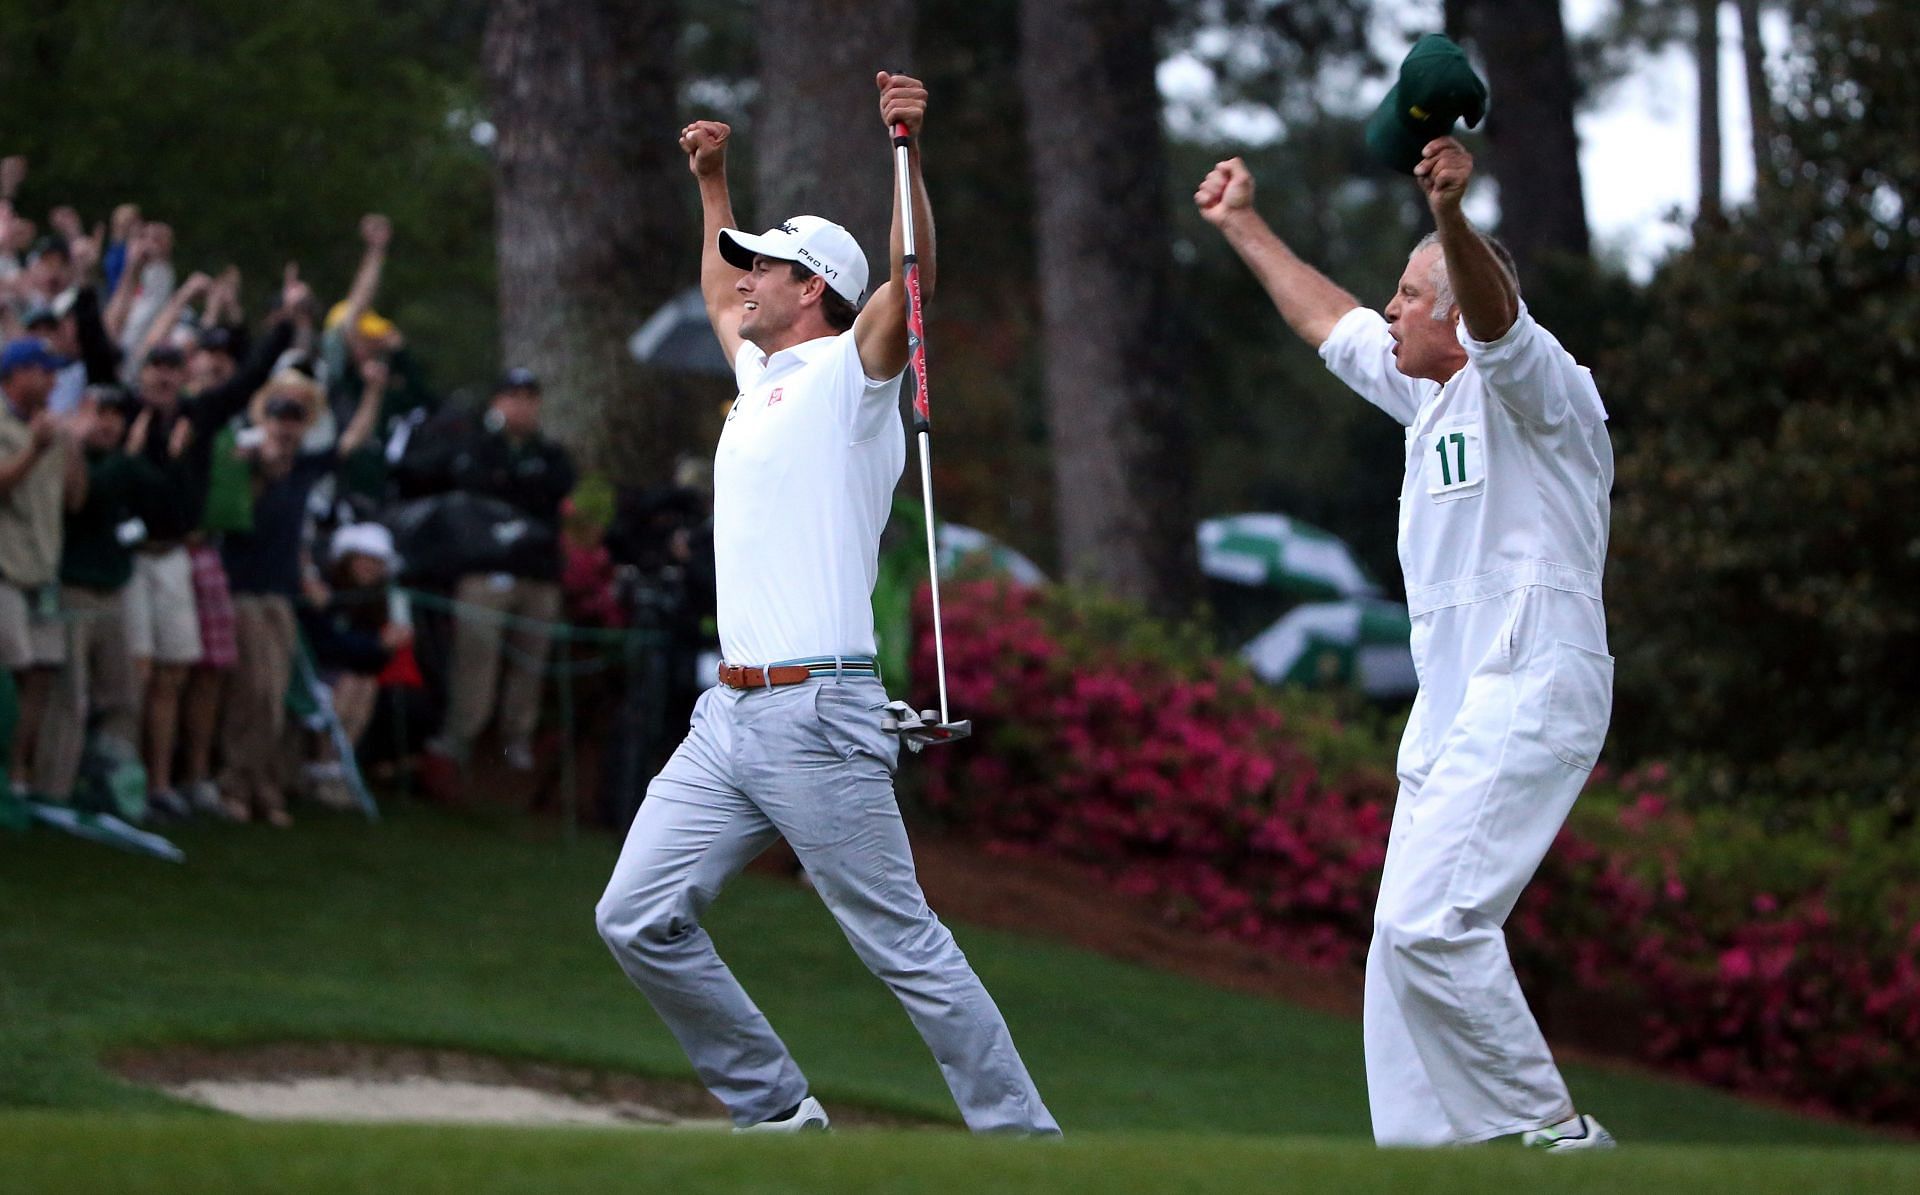 Adam Scott celebrates after his birdie putt on the second playoff hole, which saw him win the Green Jacket, during the final round of the 2013 Masters